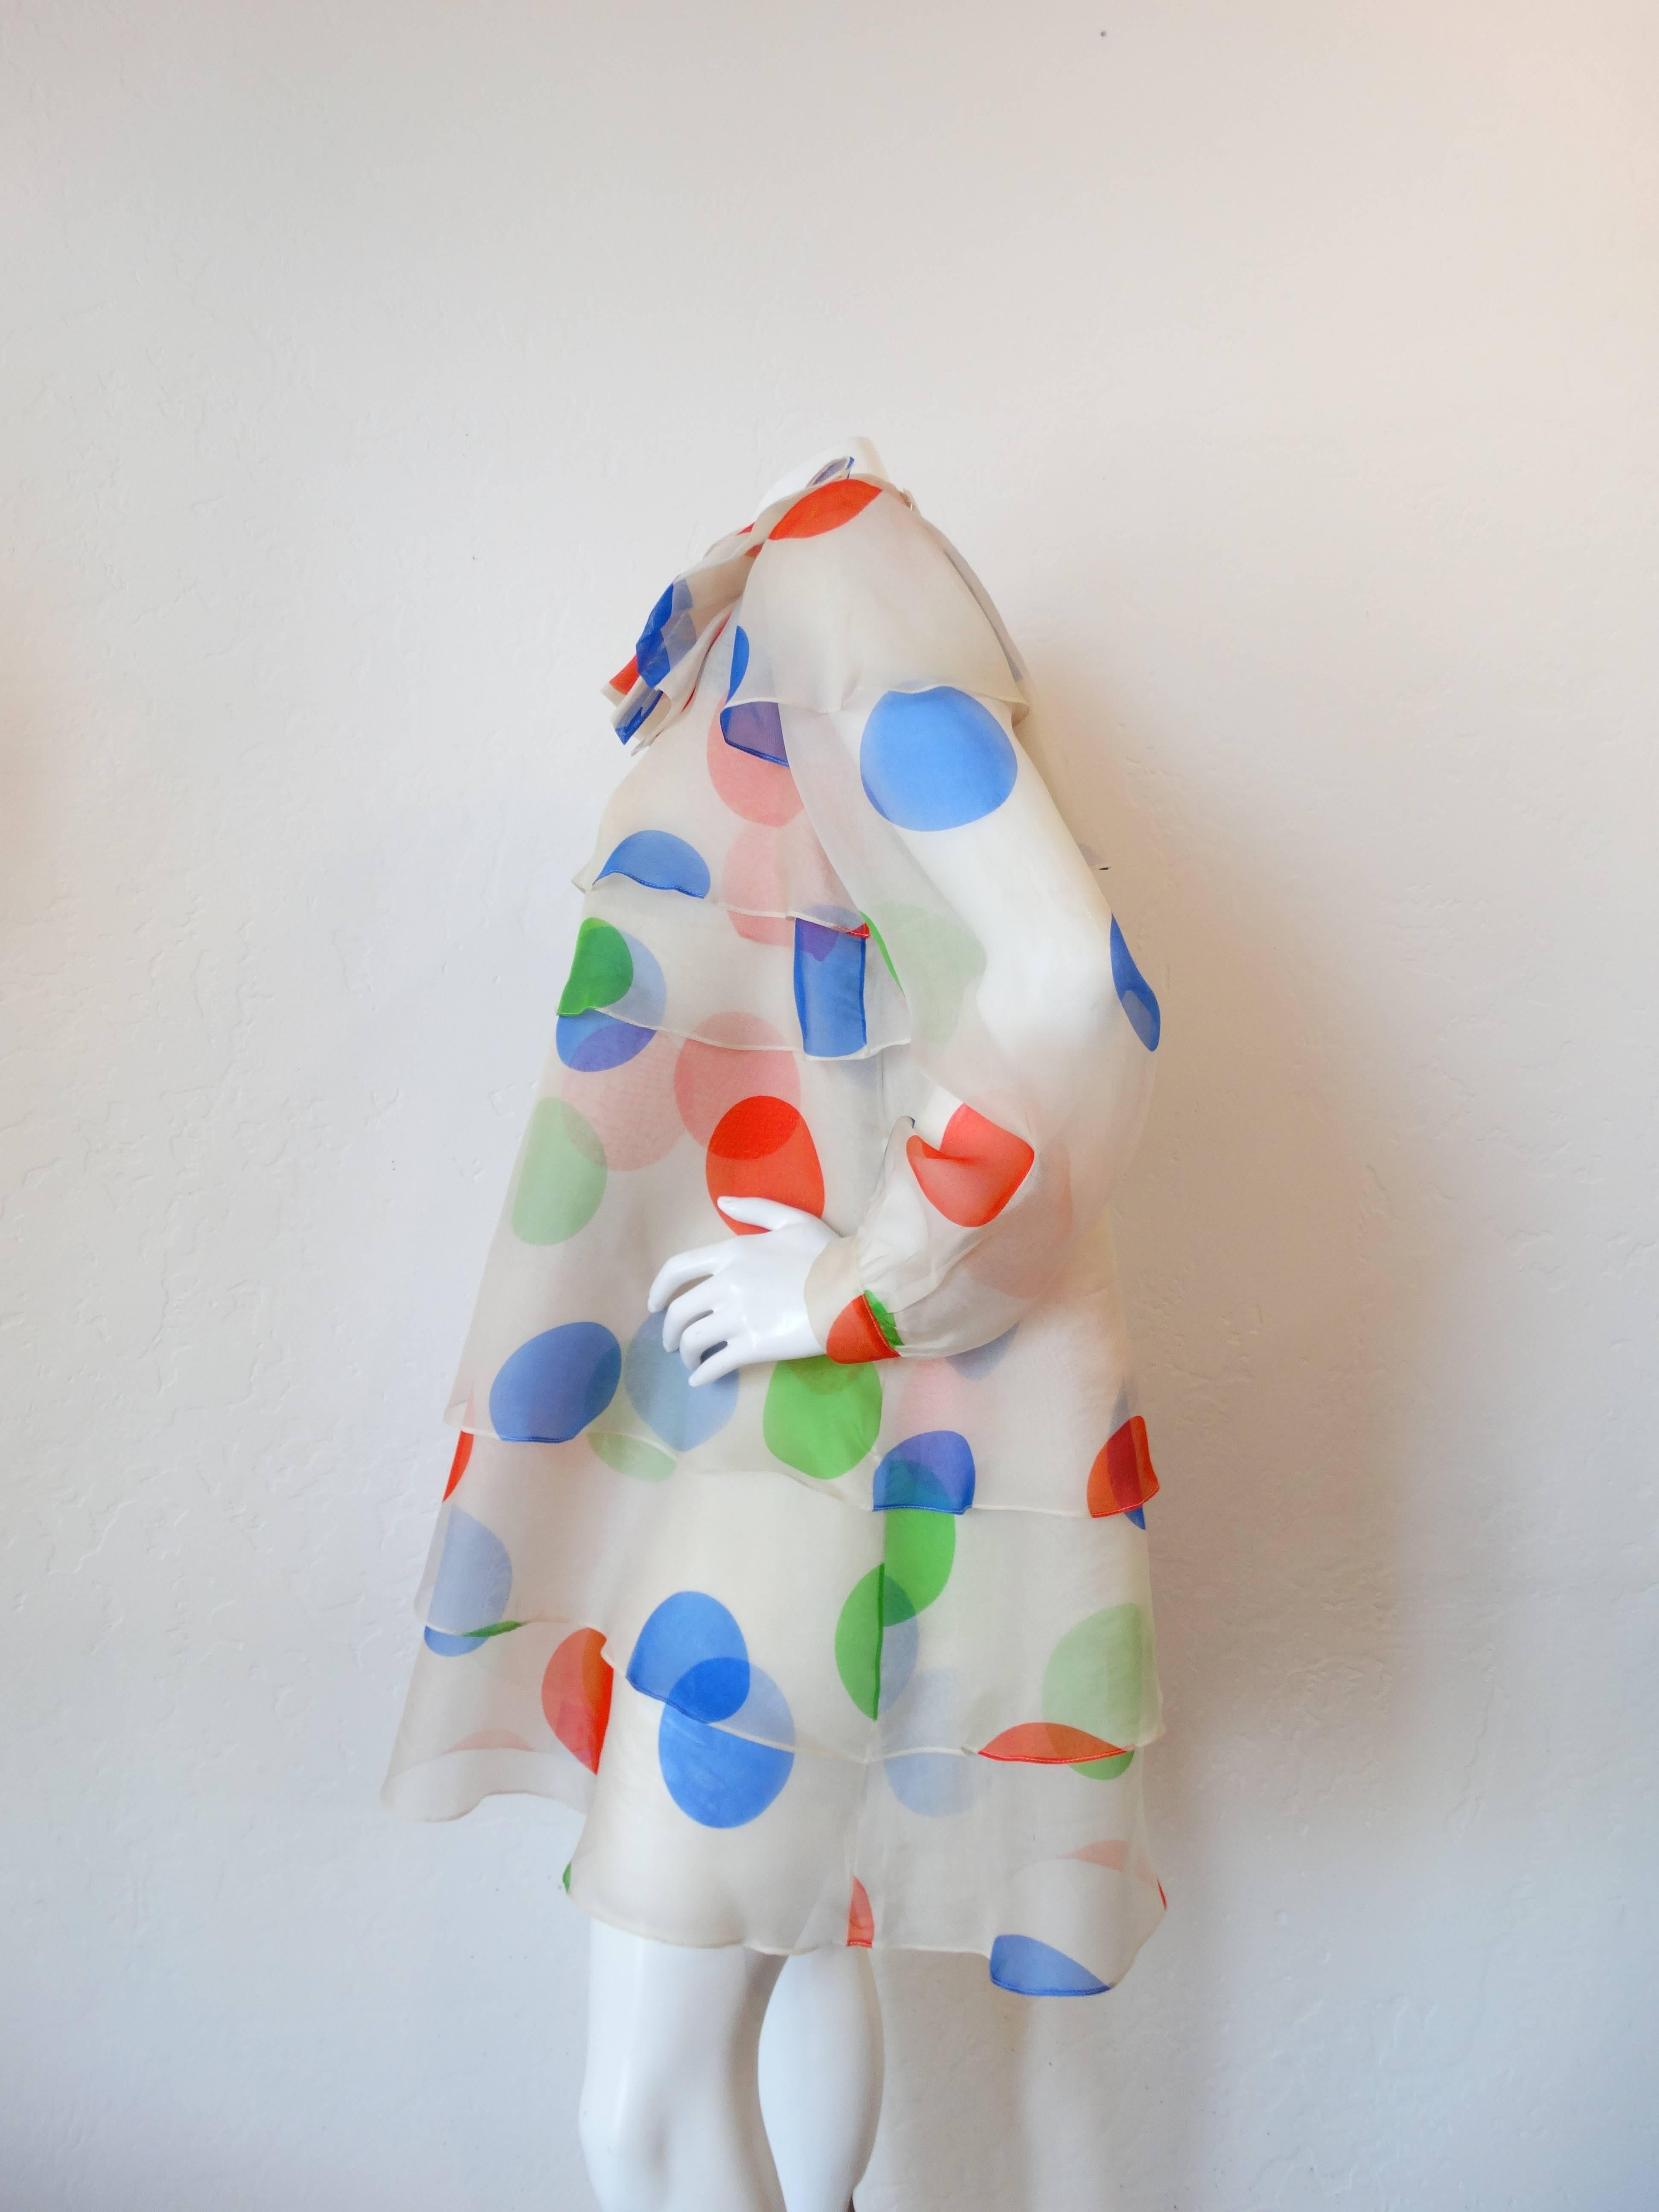 We are OBSESSED with Fong Leng! Originating in Amsterdam- these vintage pieces are hard to come by! This dress is from Fong Leng's studio line- in a brilliant multicolored polkadot print. Light, sheer chiffon fabric layered to create the perfect